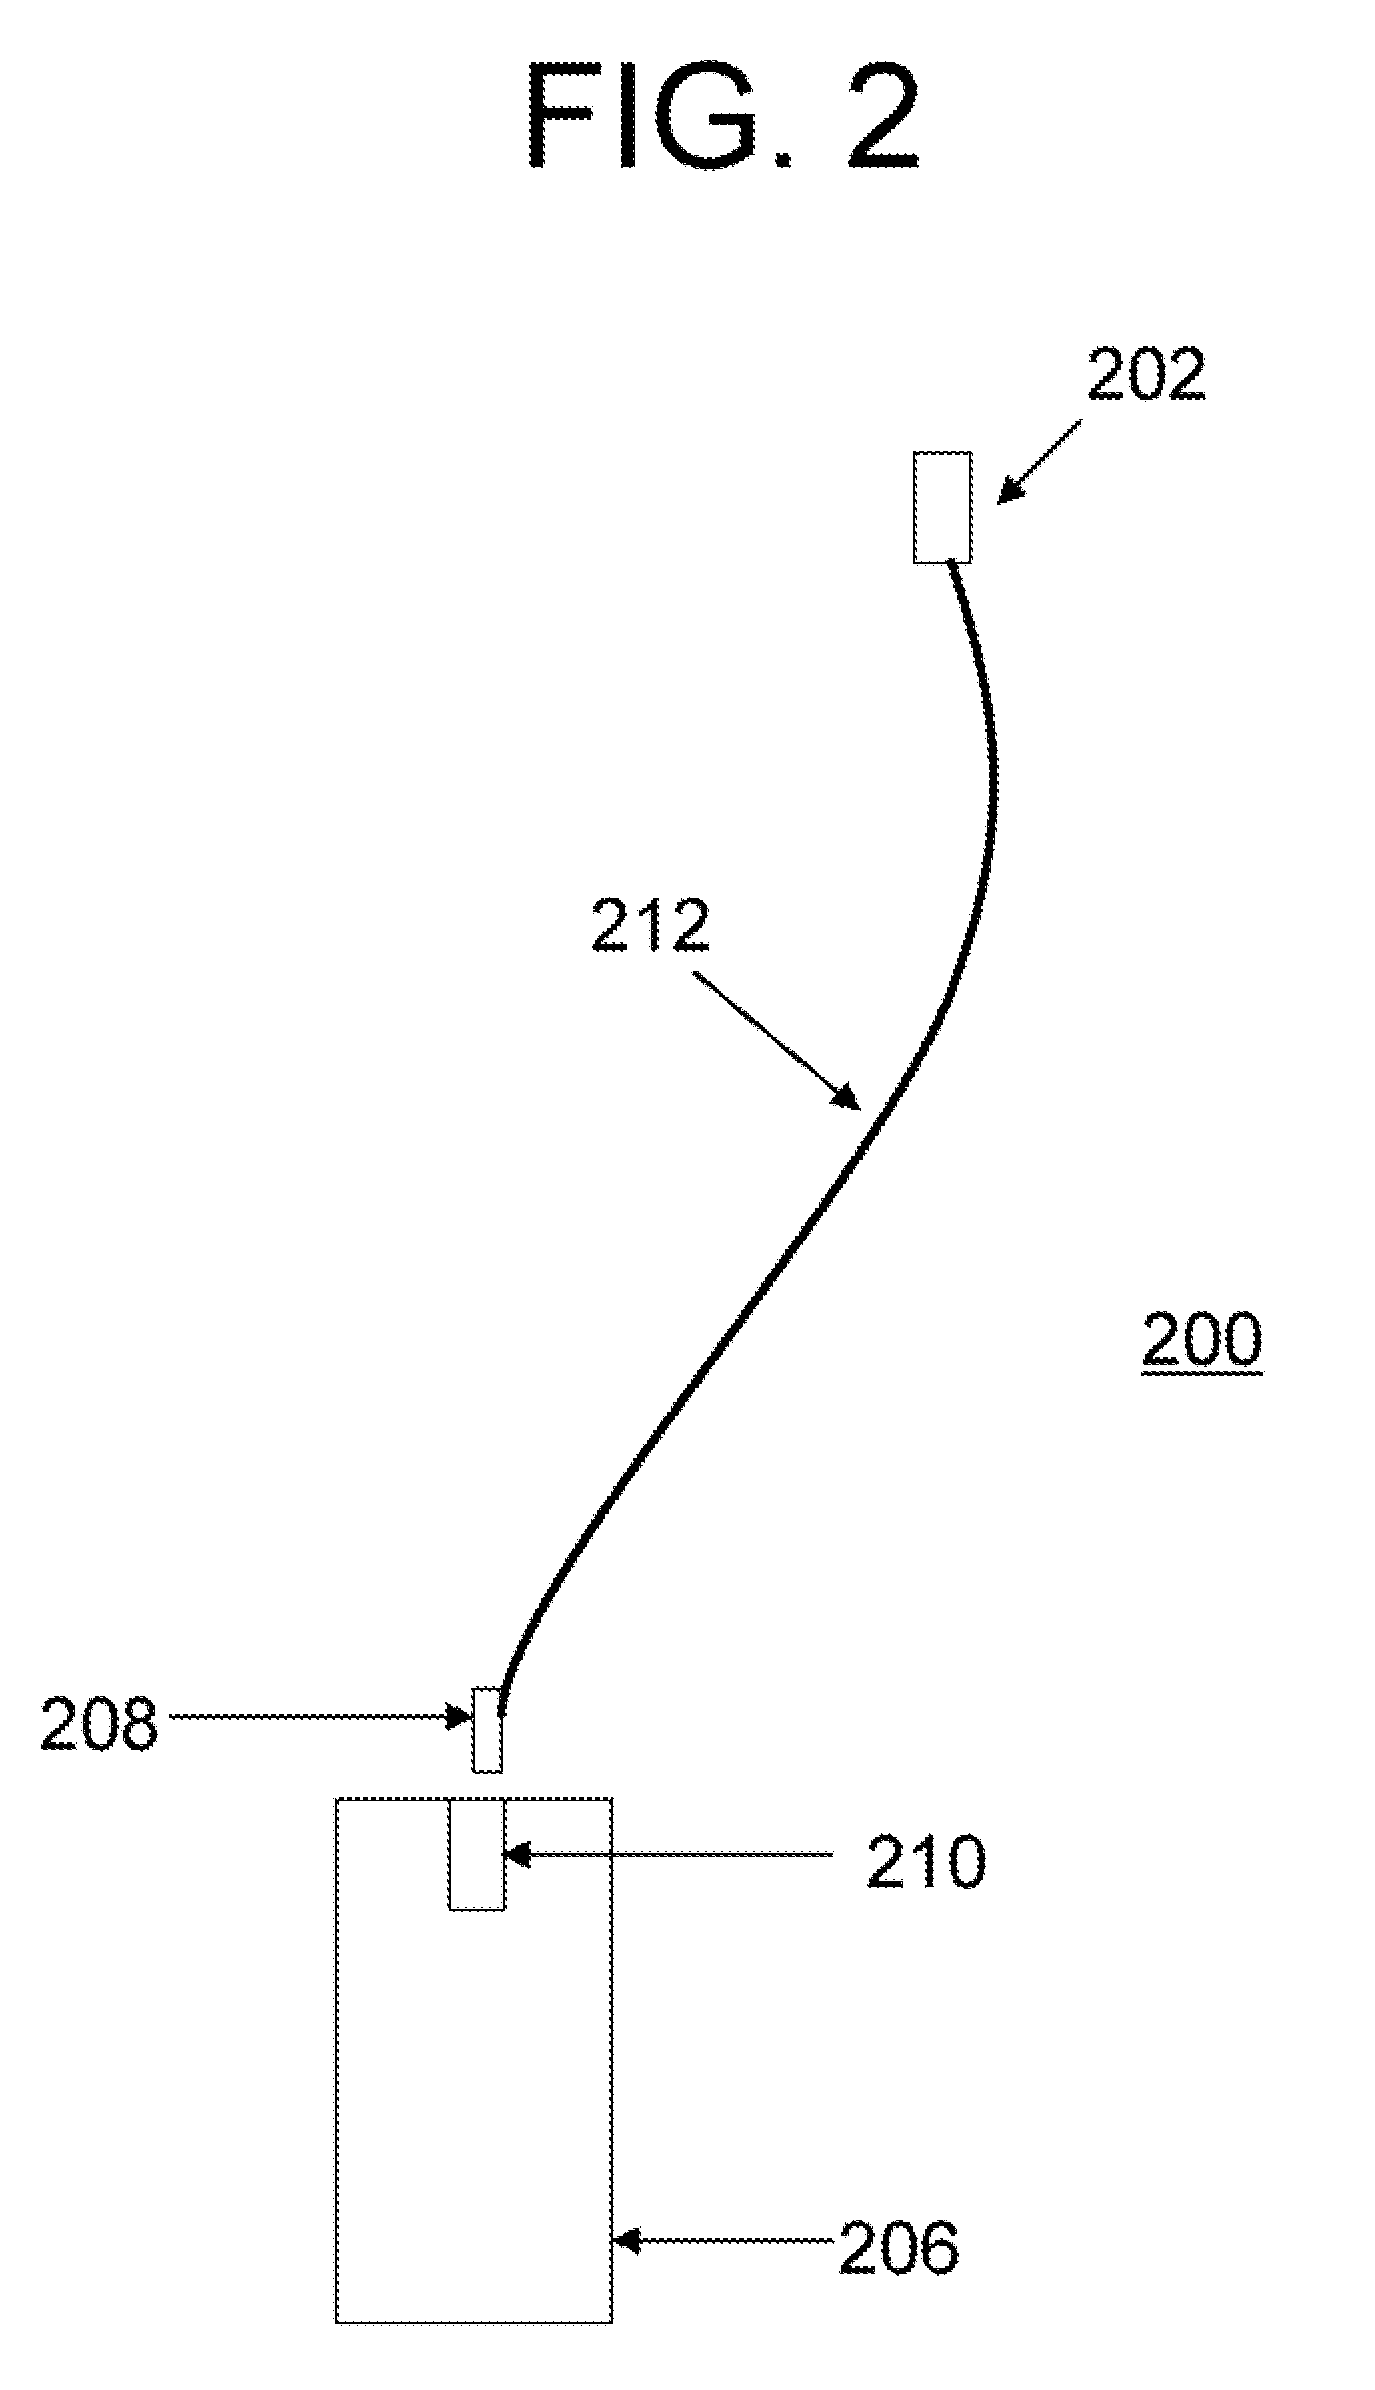 Anti-Tangle Device and Method for Preventing Cord Tangling